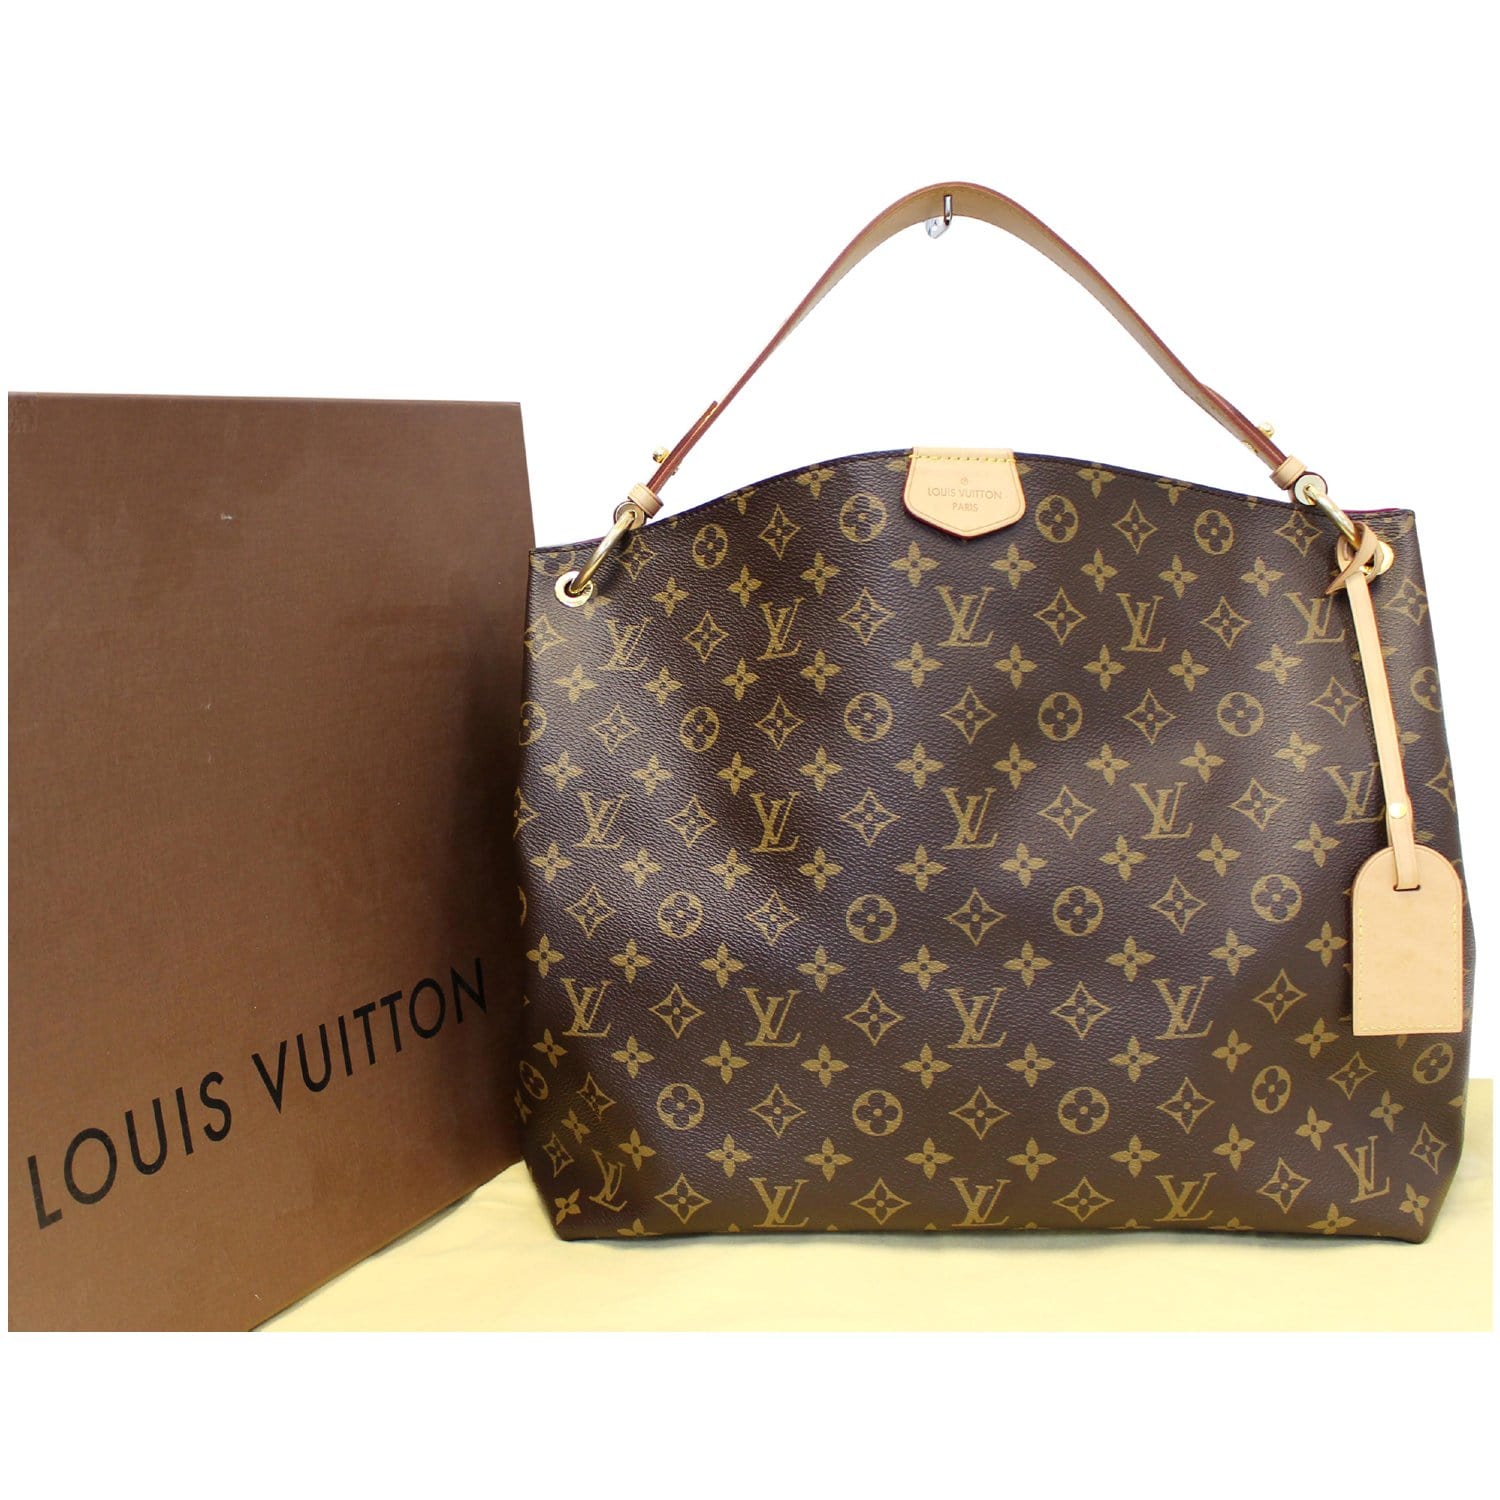  A Guide to Authenticating the Louis Vuitton Graceful